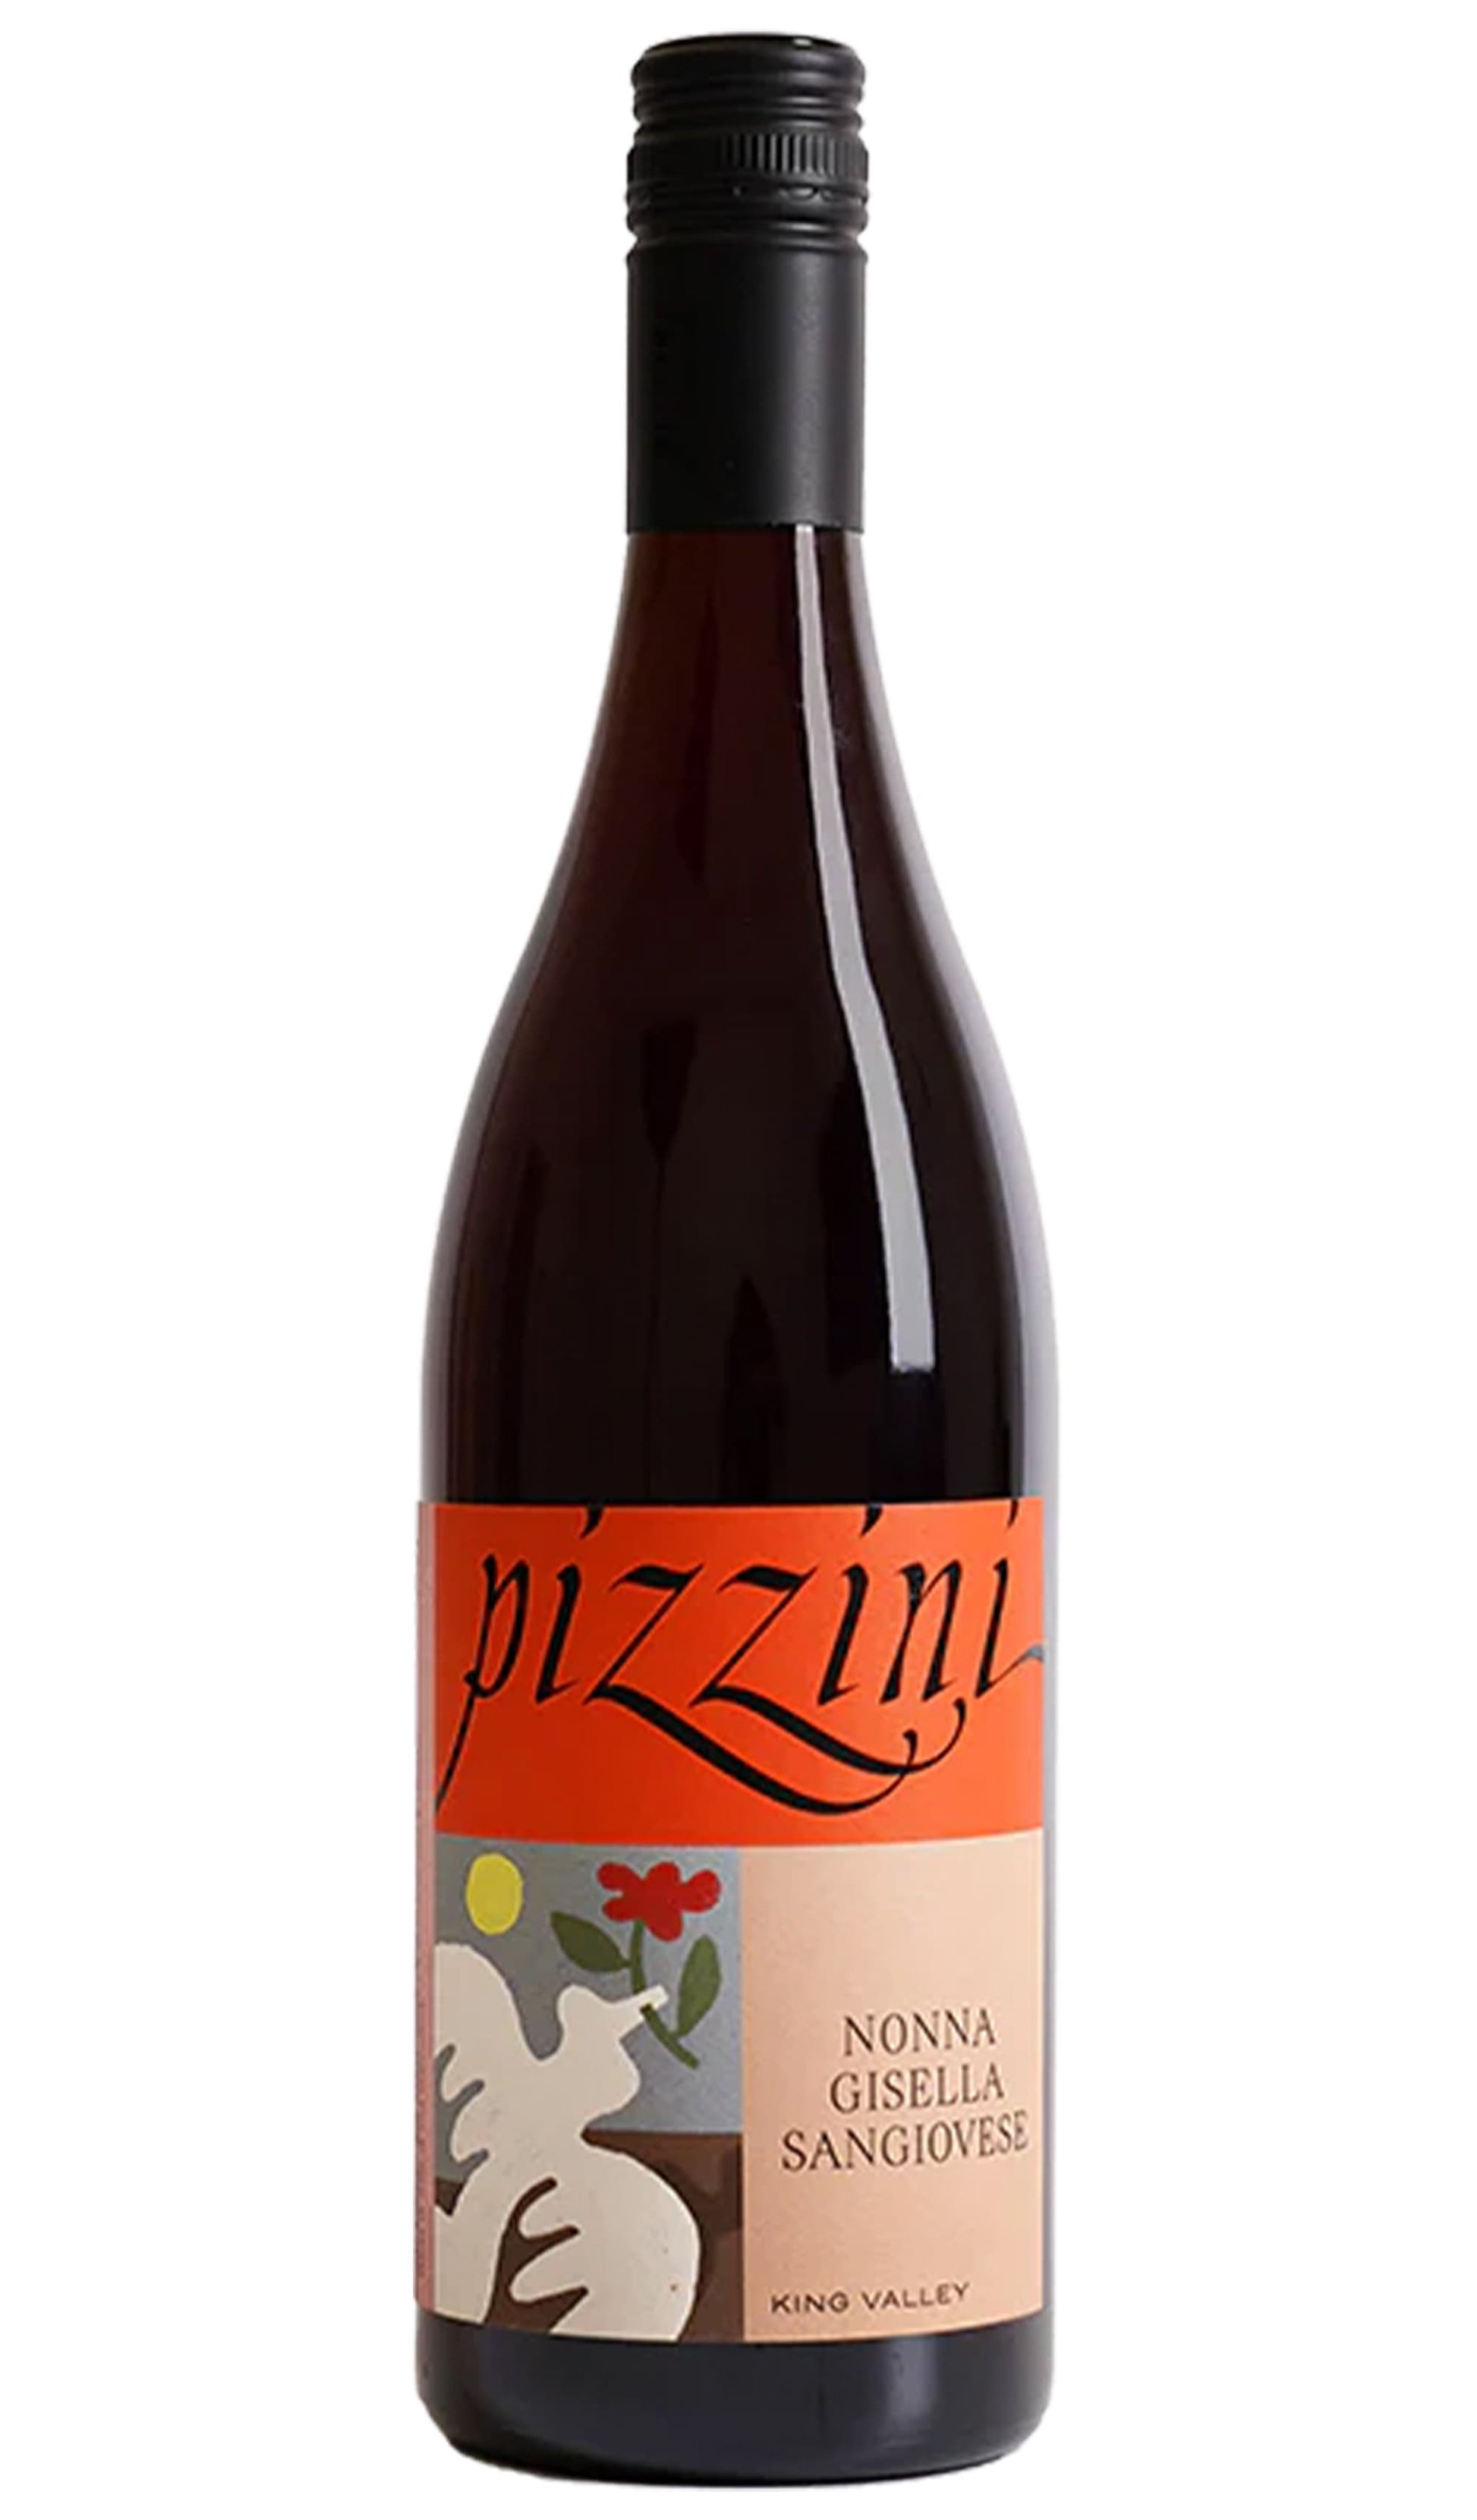 Find out more or buy Pizzini Nonna Gisella Sangiovese 2023 (King Valley) online at Wine Sellers Direct - Australia’s independent liquor specialists.